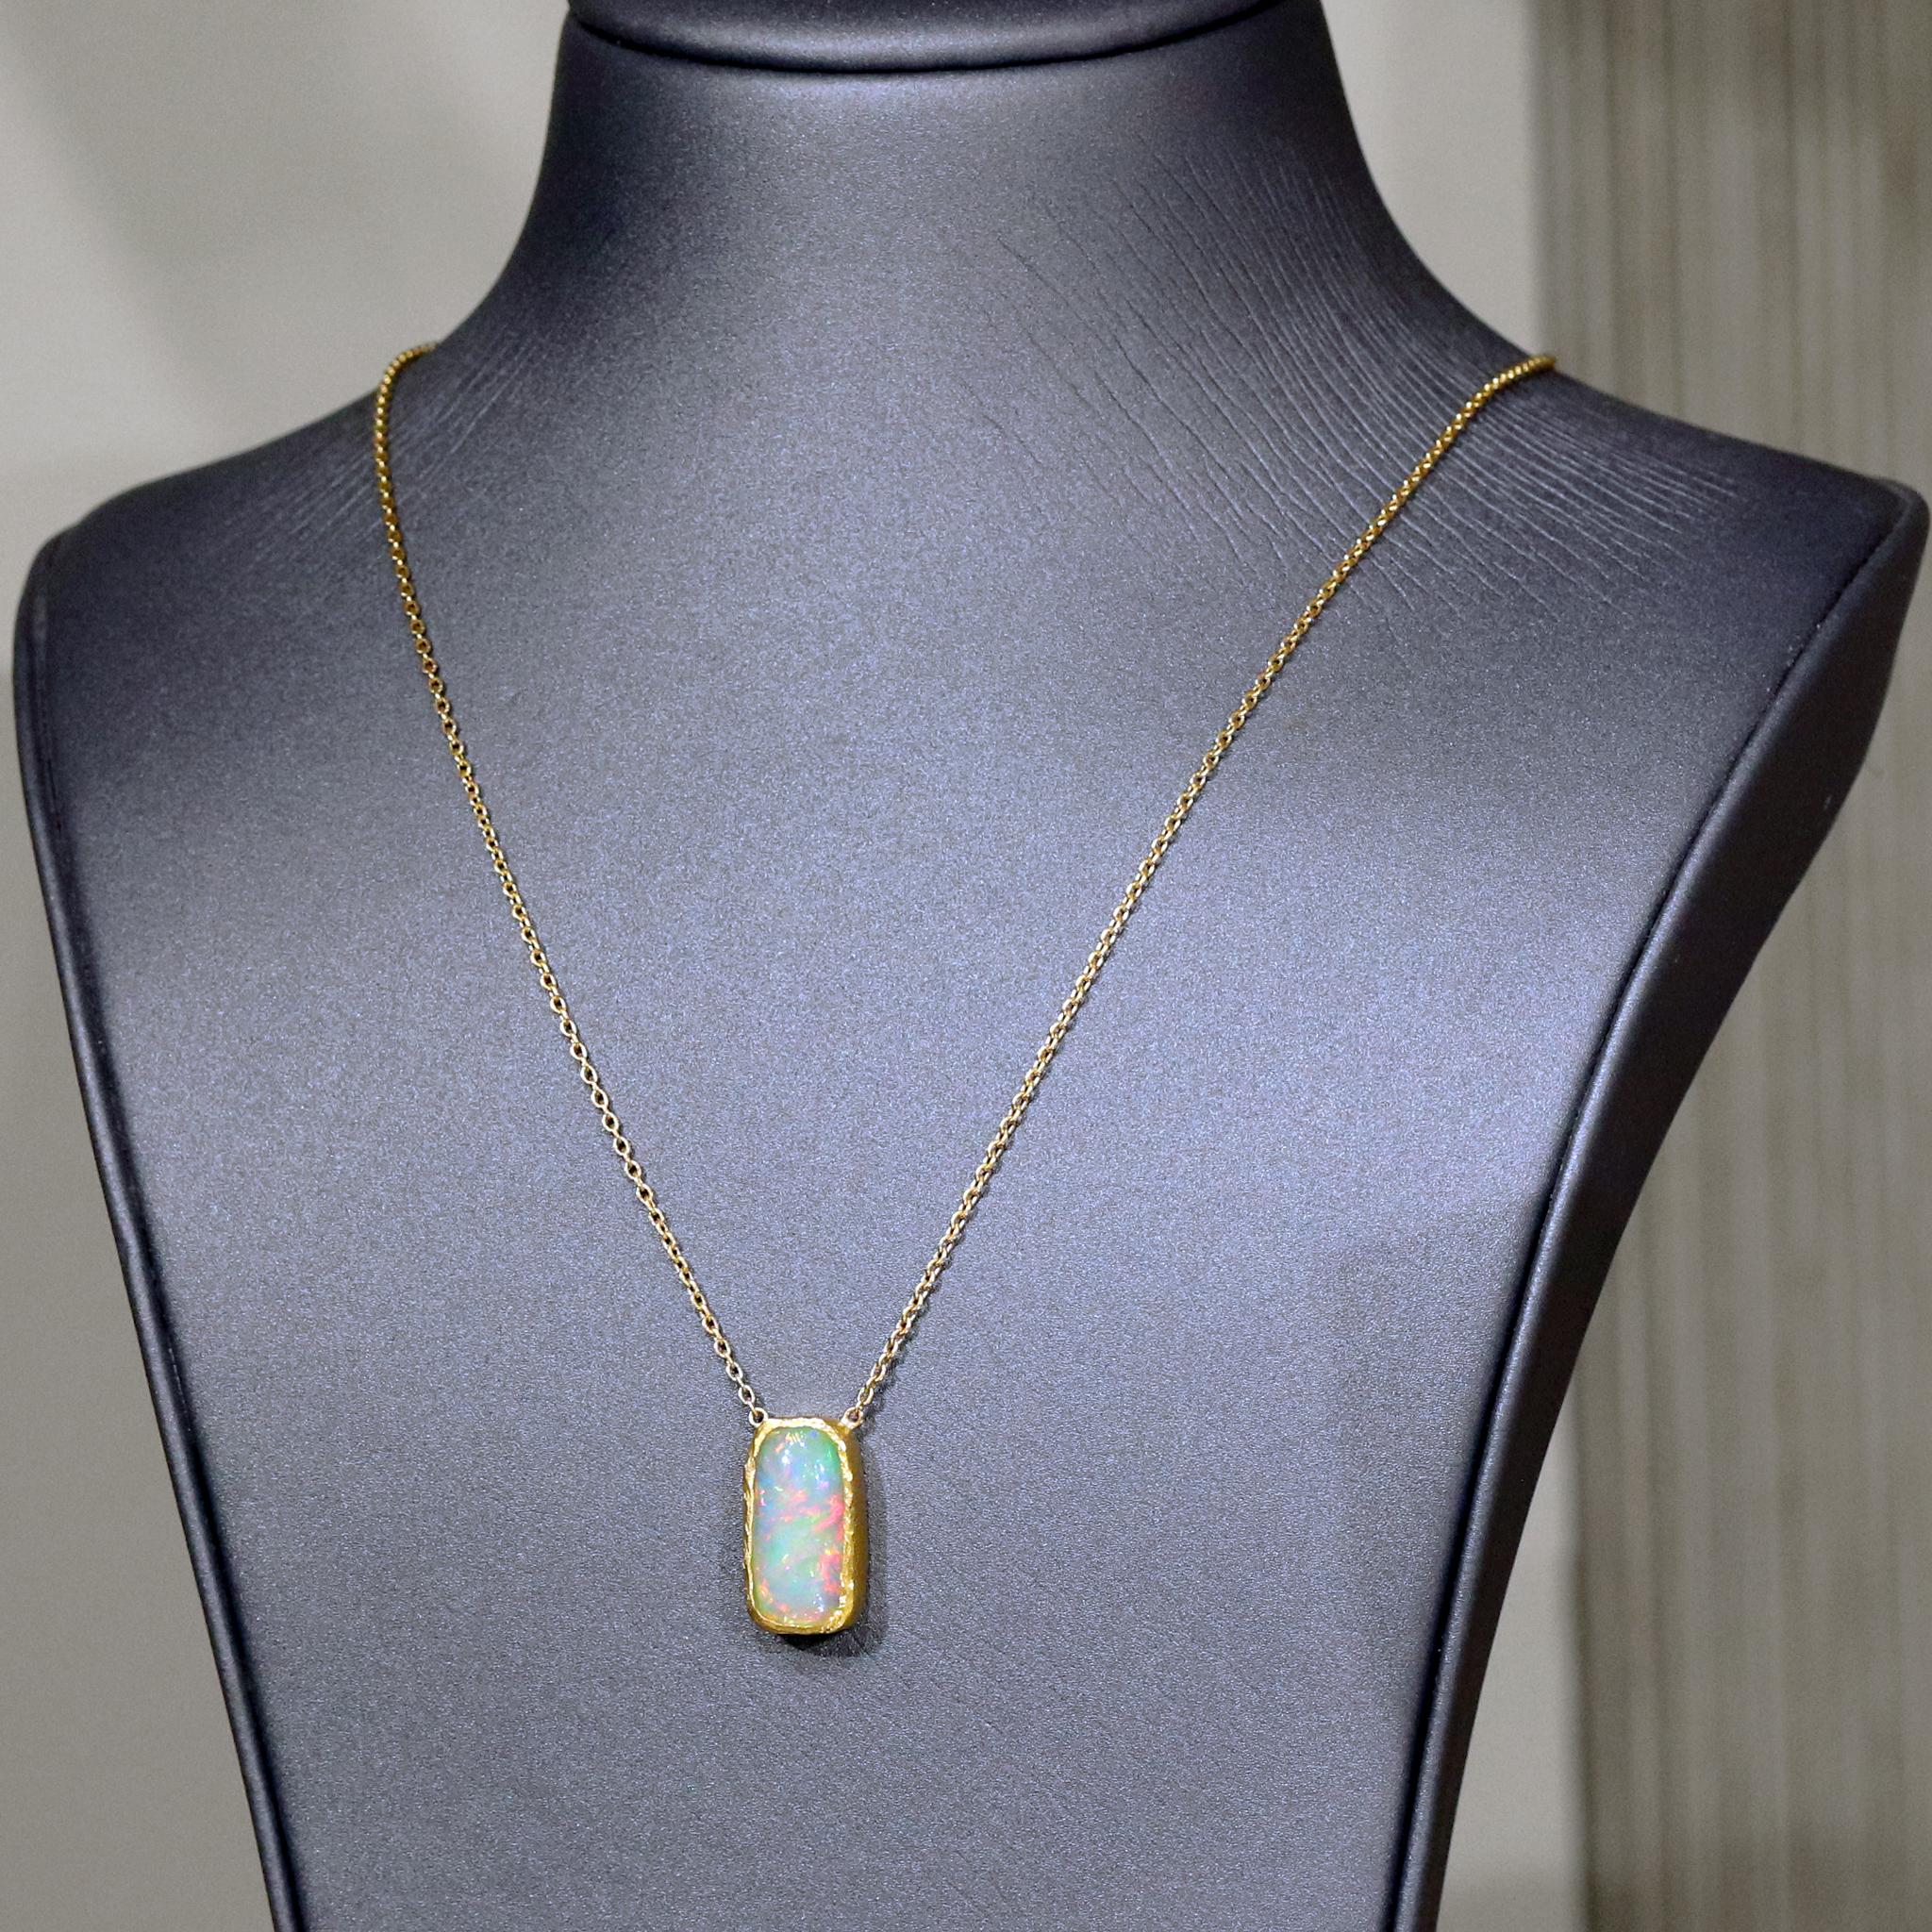 Gem Opal Fire Necklace by acclaimed jewelry maker Devta Doolan showcasing an exceptionally fine quality 20mm x 9mm solid gem crystal Ethiopian opal cabochon with remarkable rainbow flash, fire, and color change. The gem opal is hand-fabricated in